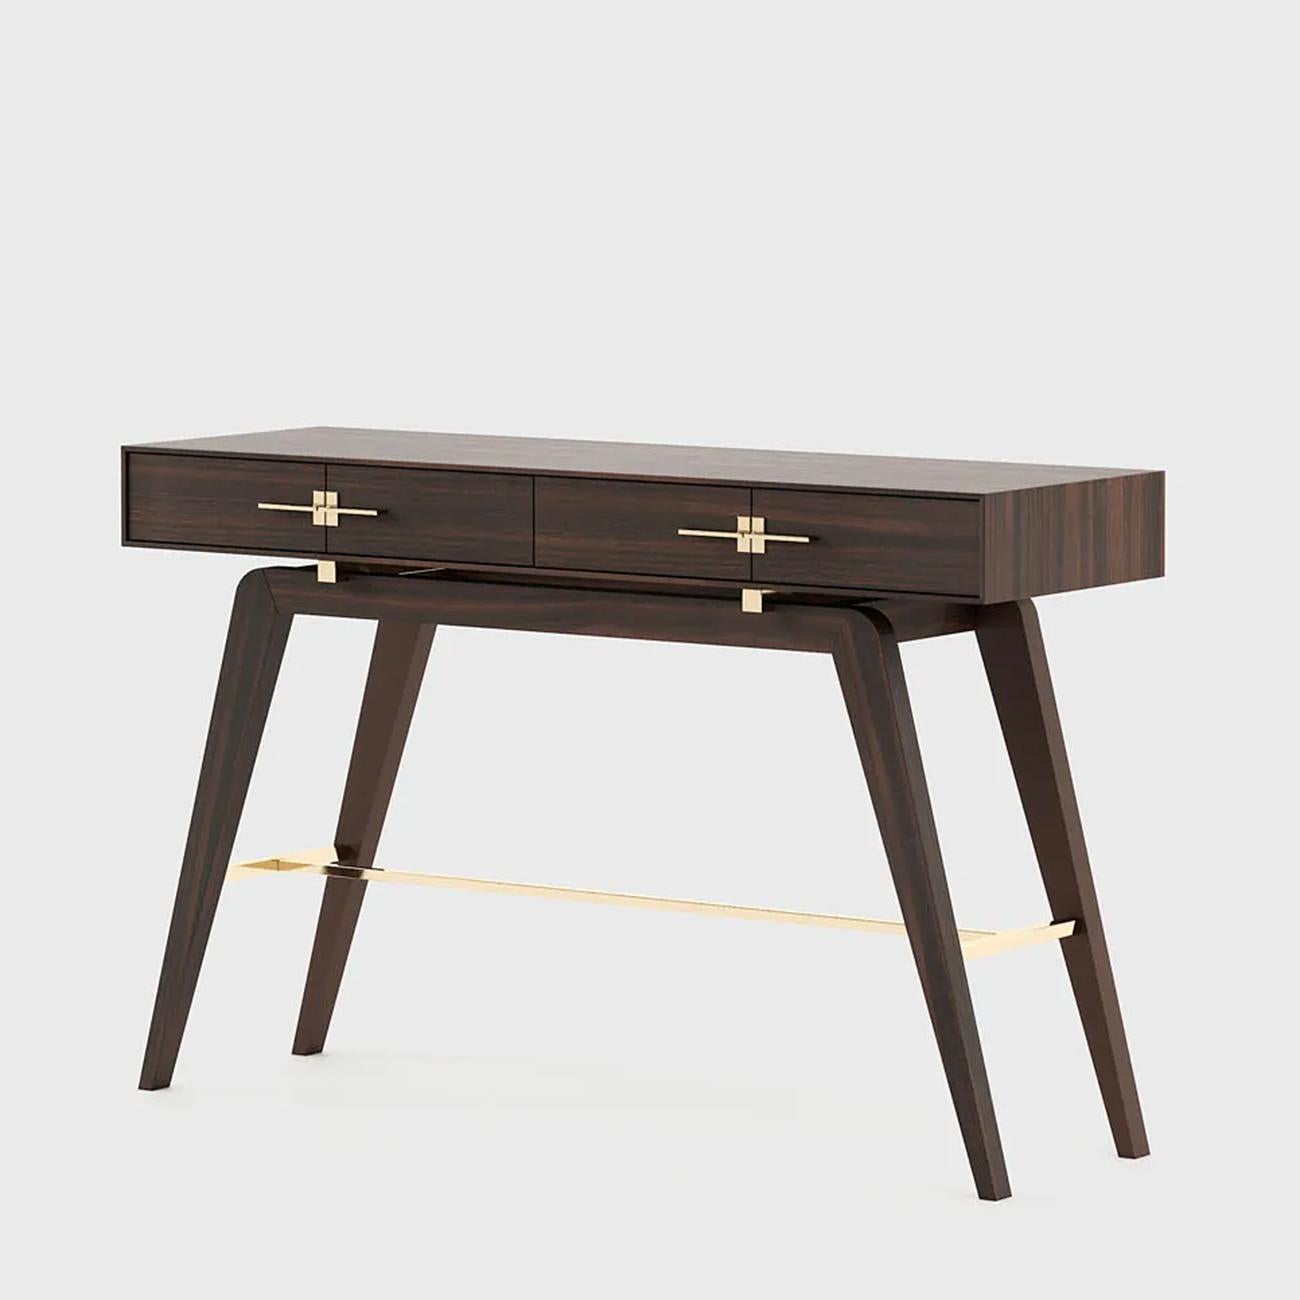 Console table Ostel with top all in matte smocked eucalyptus in matte finish, 
including 2 drawers with easy glide system. handles and Base reinforcement 
in polished stainless steel in gold finish.
Also available in glossy ebony, or matte oak